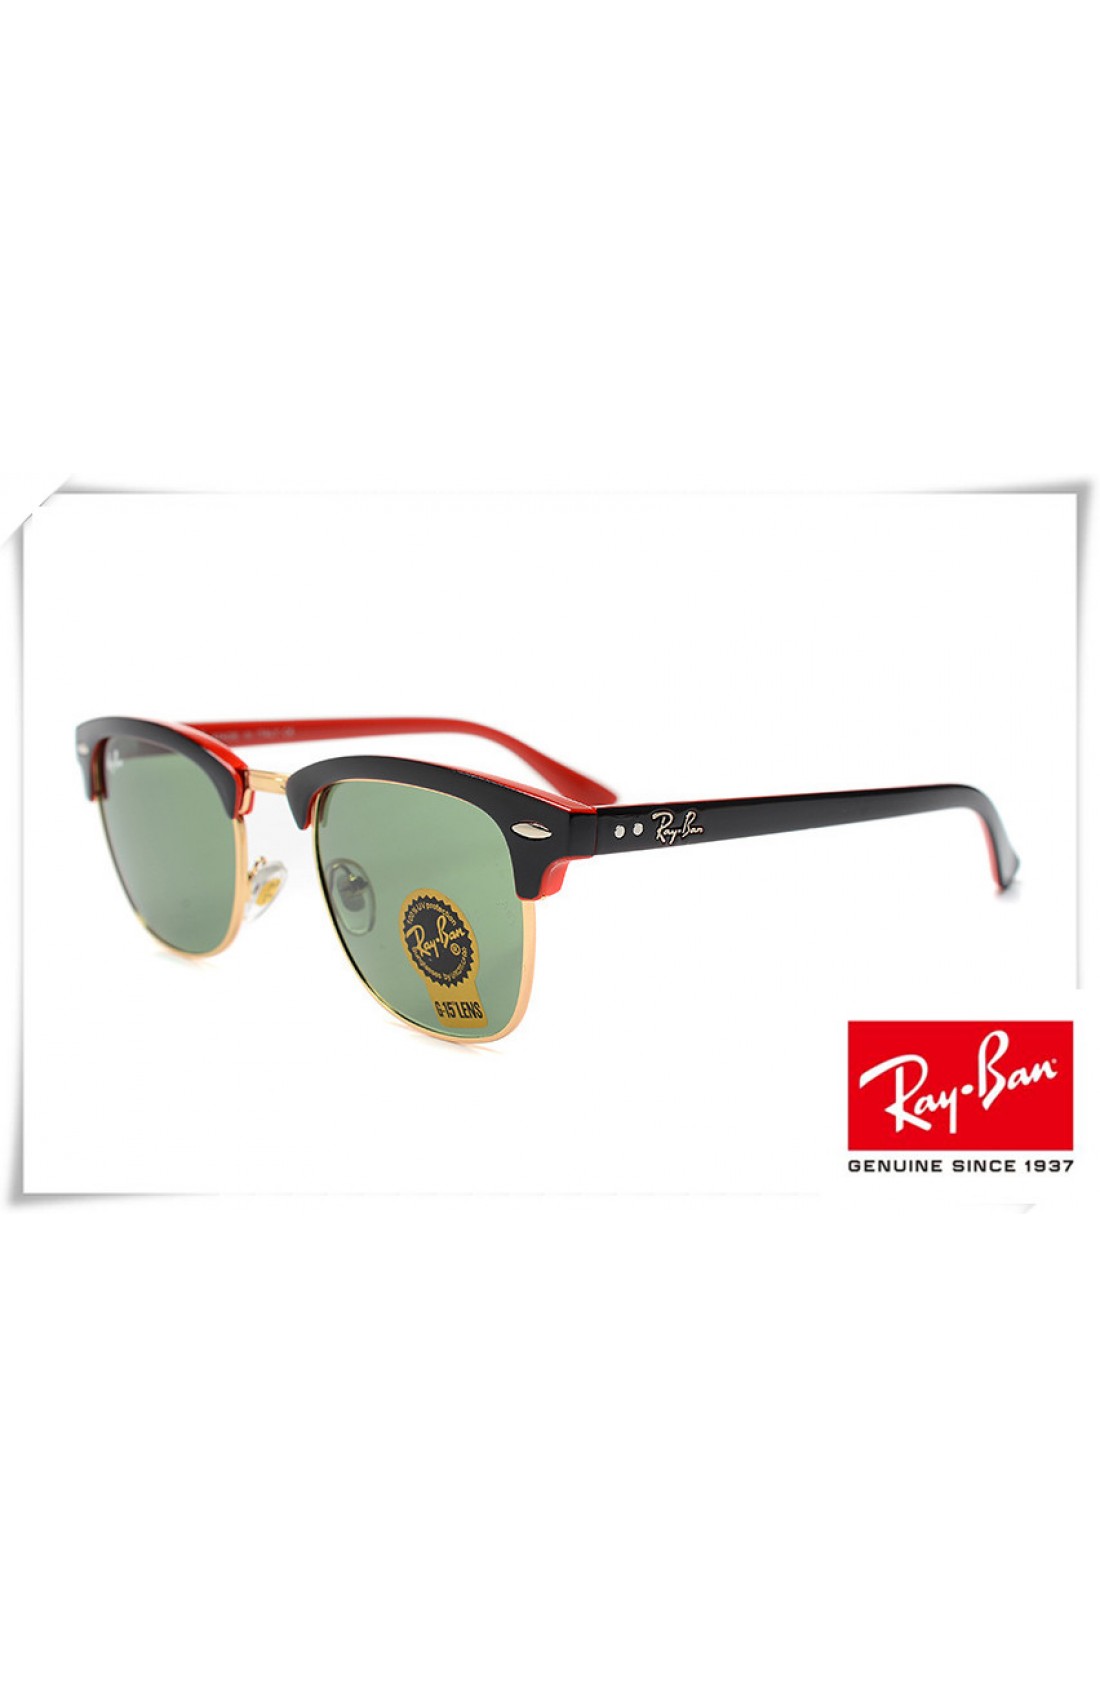 ray ban red and black frames